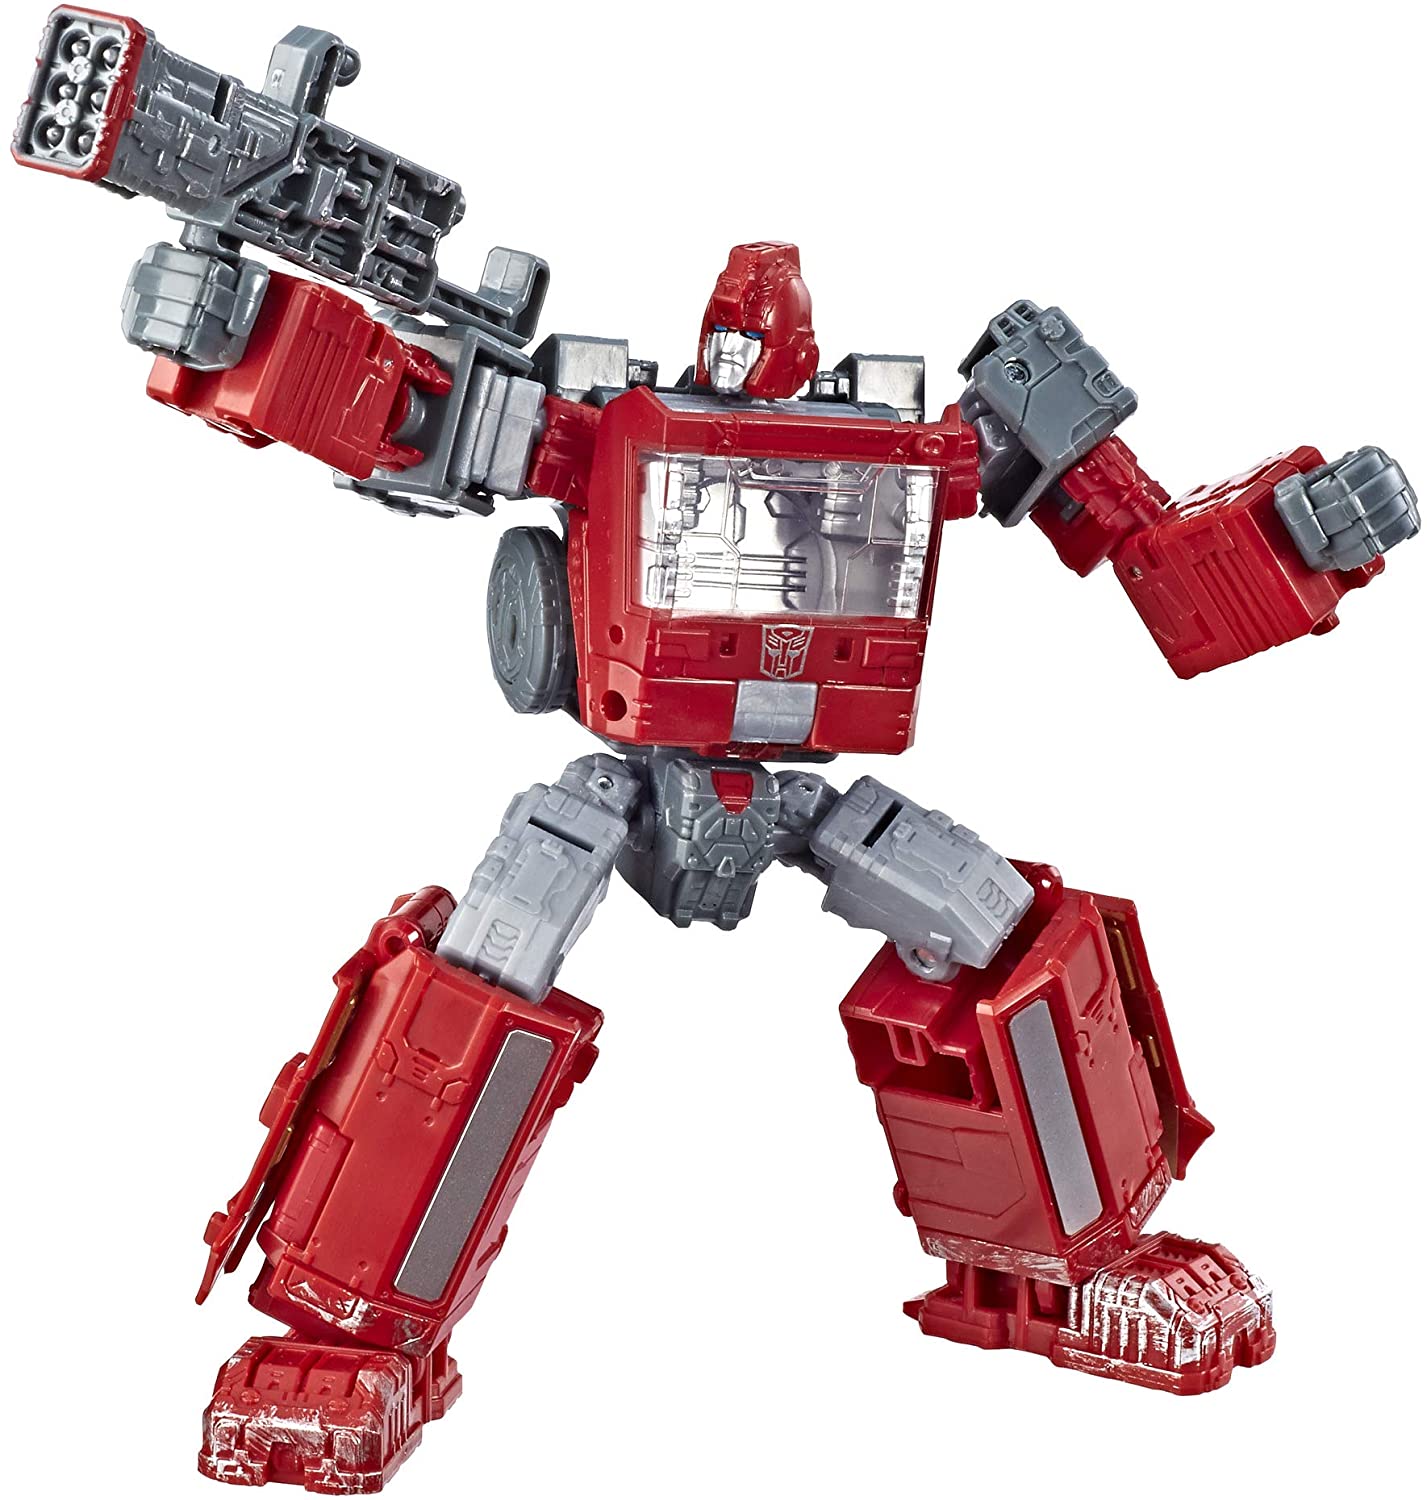 Transformers Toys Generations War For Cybertron Deluxe Wfc S21 Ironhide Action Figure Chapter & Kids Ages 8 & Up, 5: Toys & Games